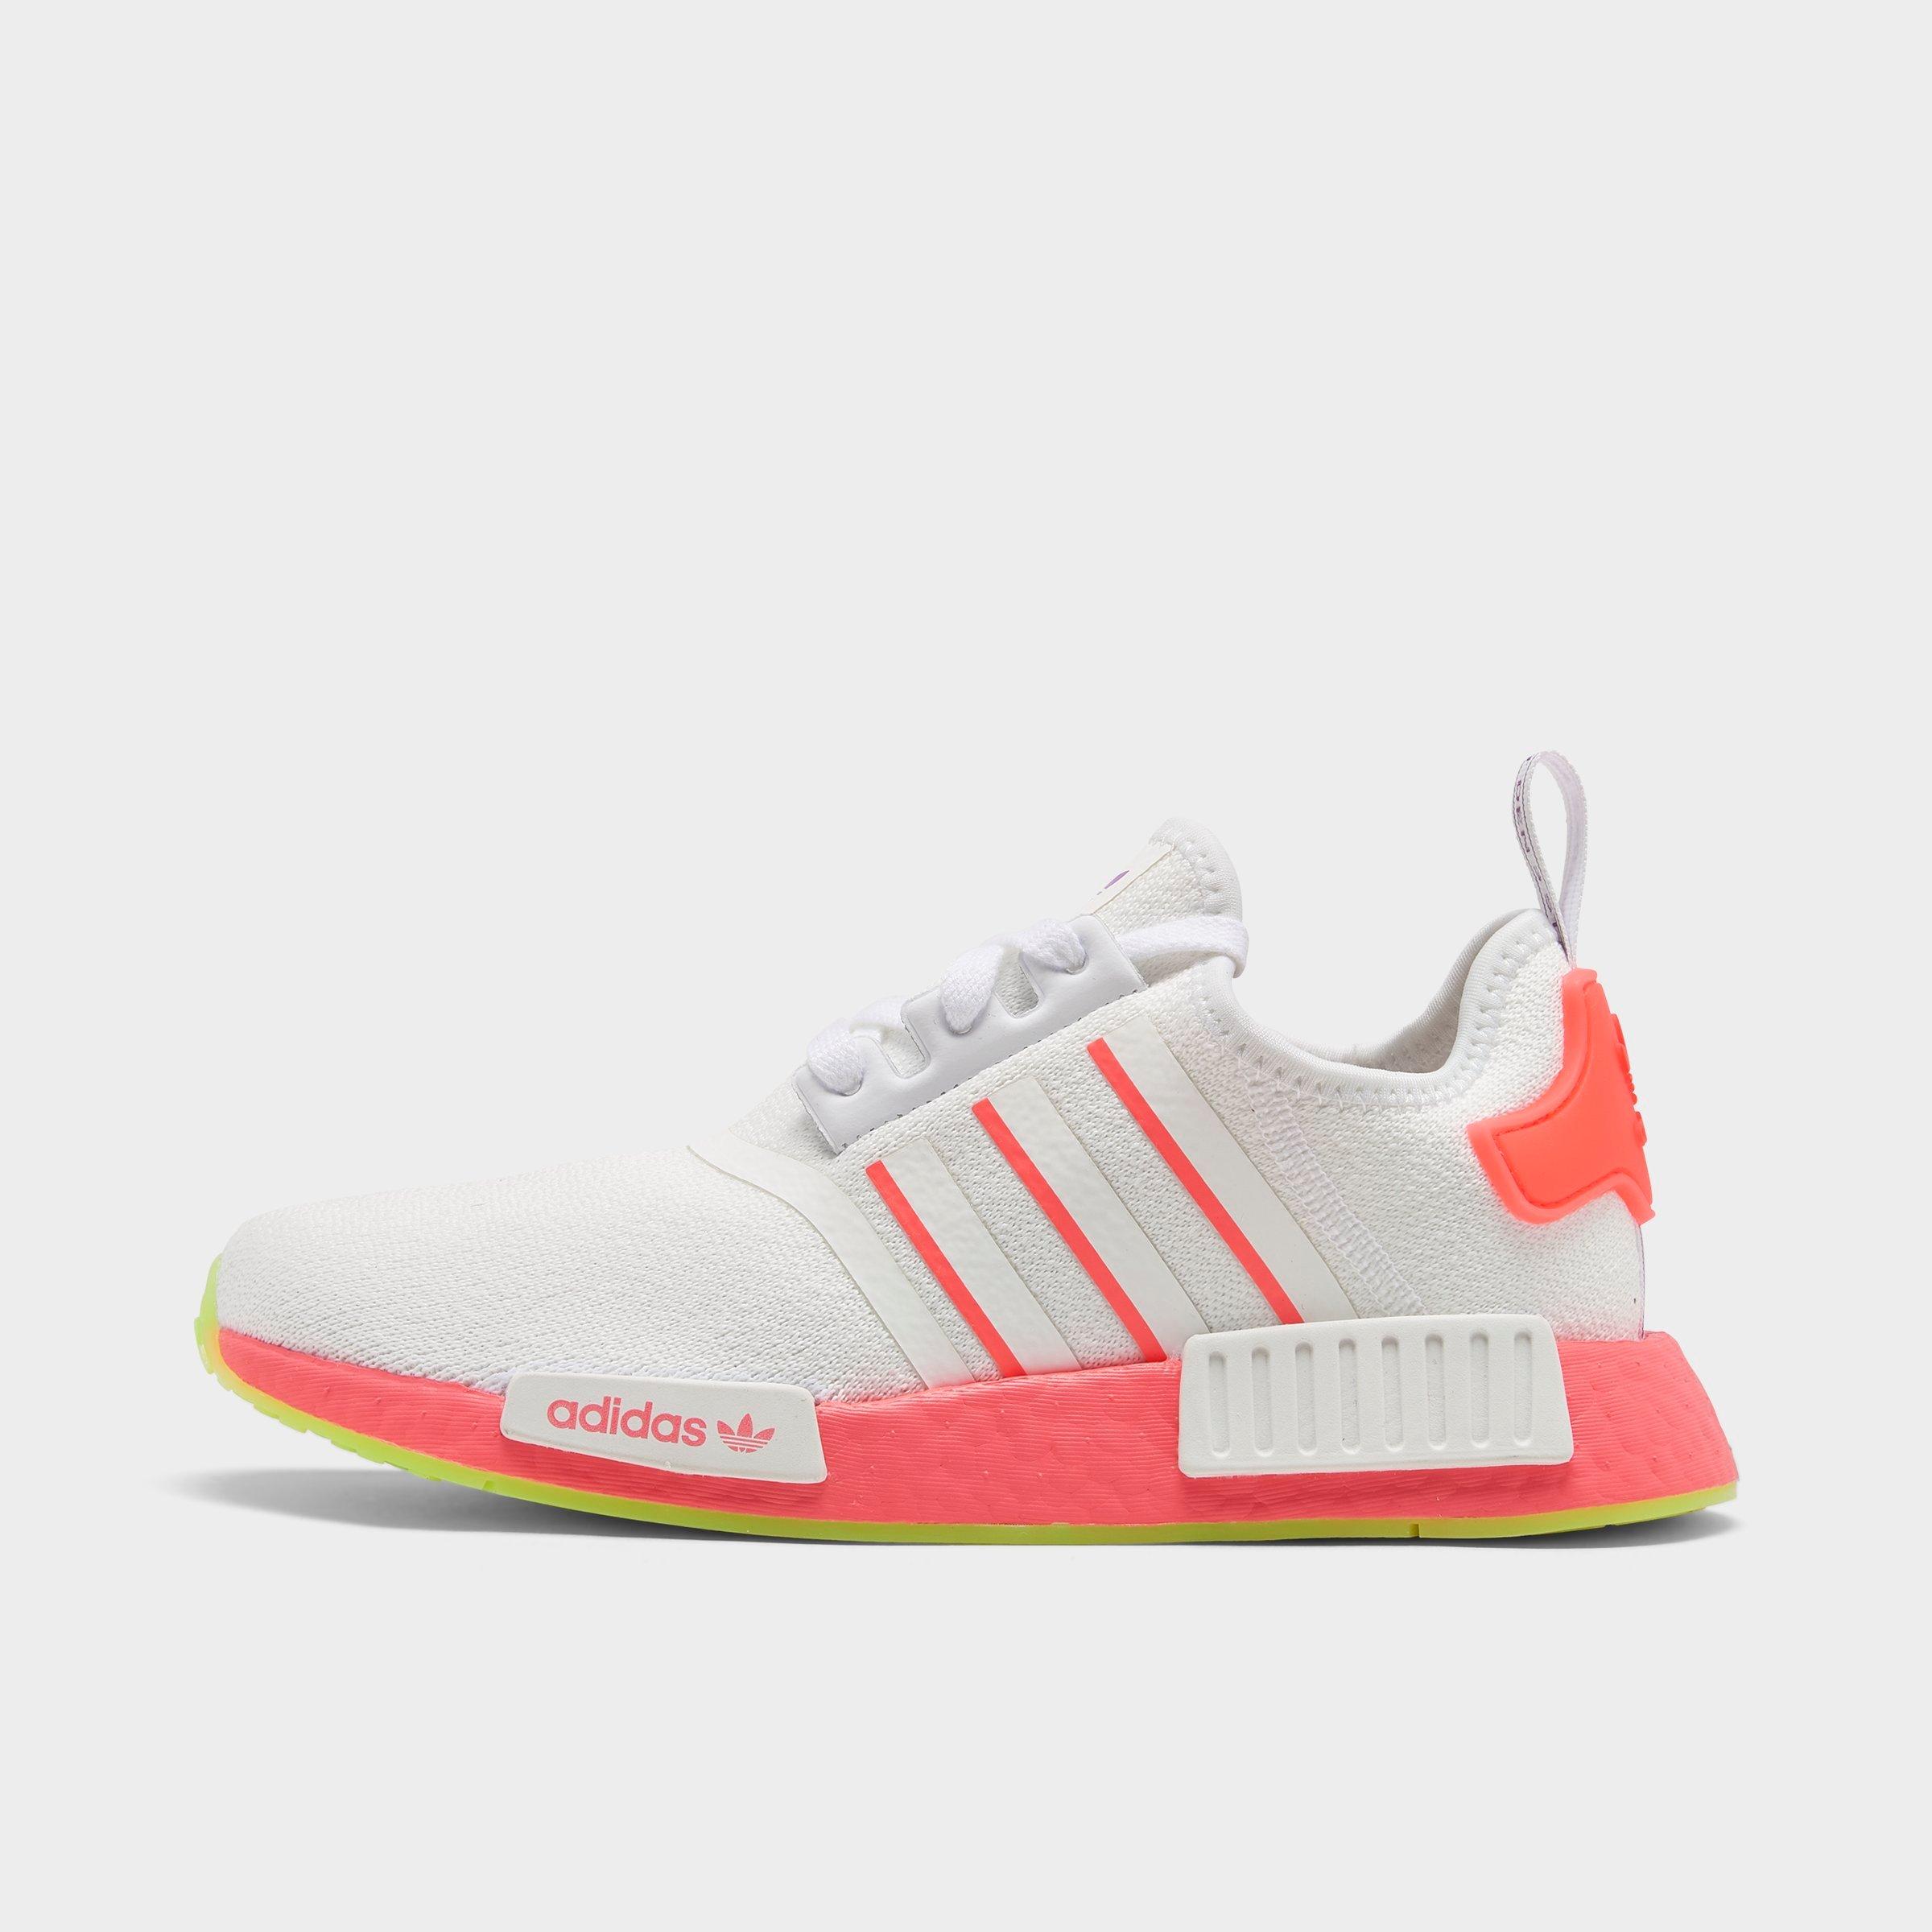 adidas nmd pink and white